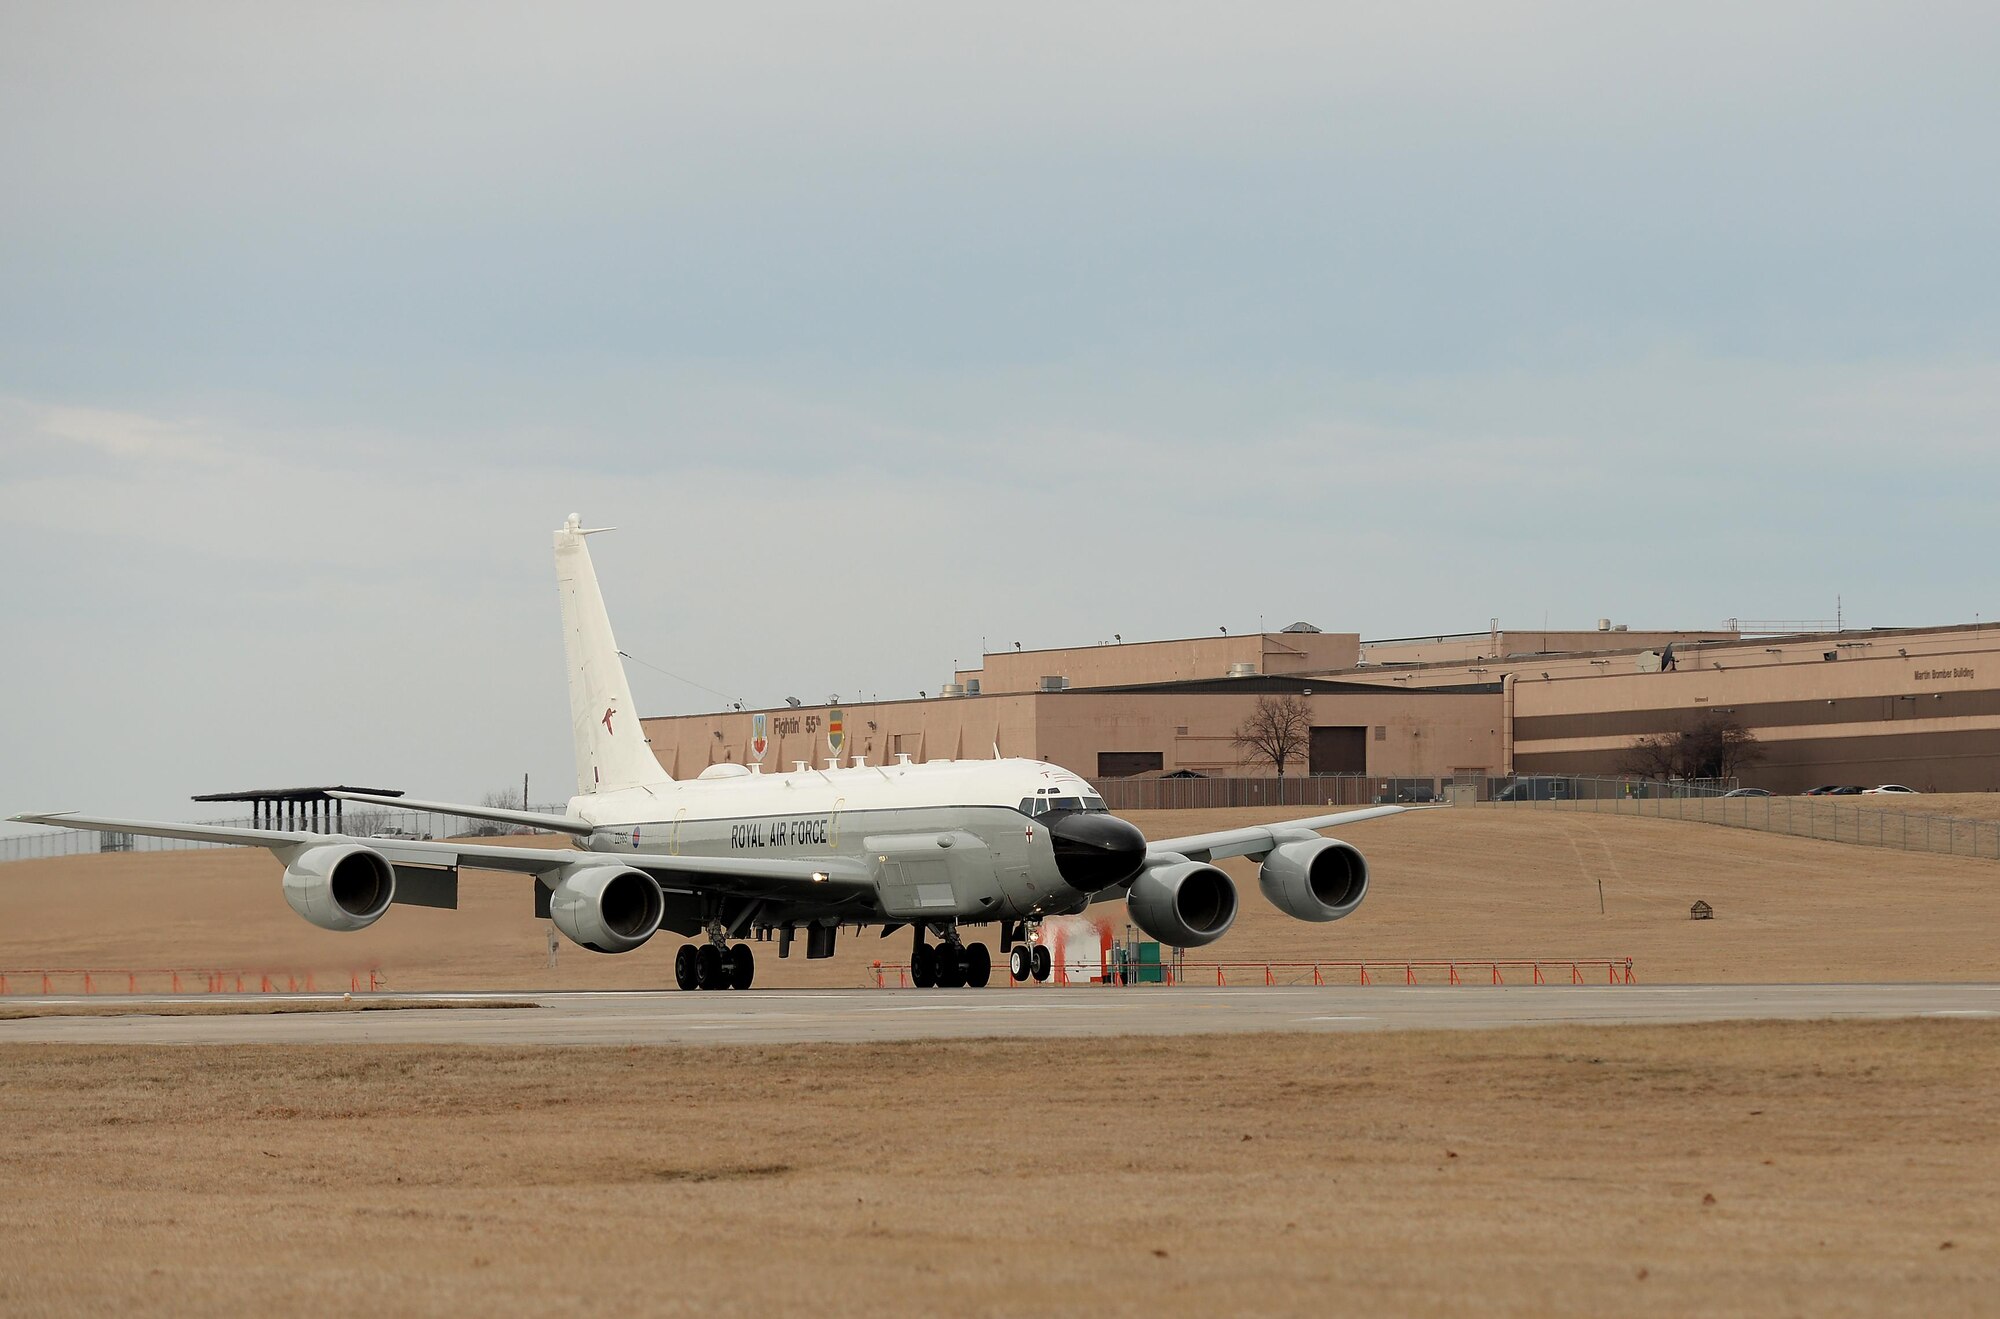 A Royal Air Force RC-135 Airseeker lands at Offutt Air Force Base, Neb. Feb. 11 to receive maintenance assistance from the 55th Maintenance Group. The aircraft diverted from Nellis Air Force Base, Nev. following landing gear problems experienced while participating in a joint exercise. (U.S. Air Force photo by Delanie Stafford)